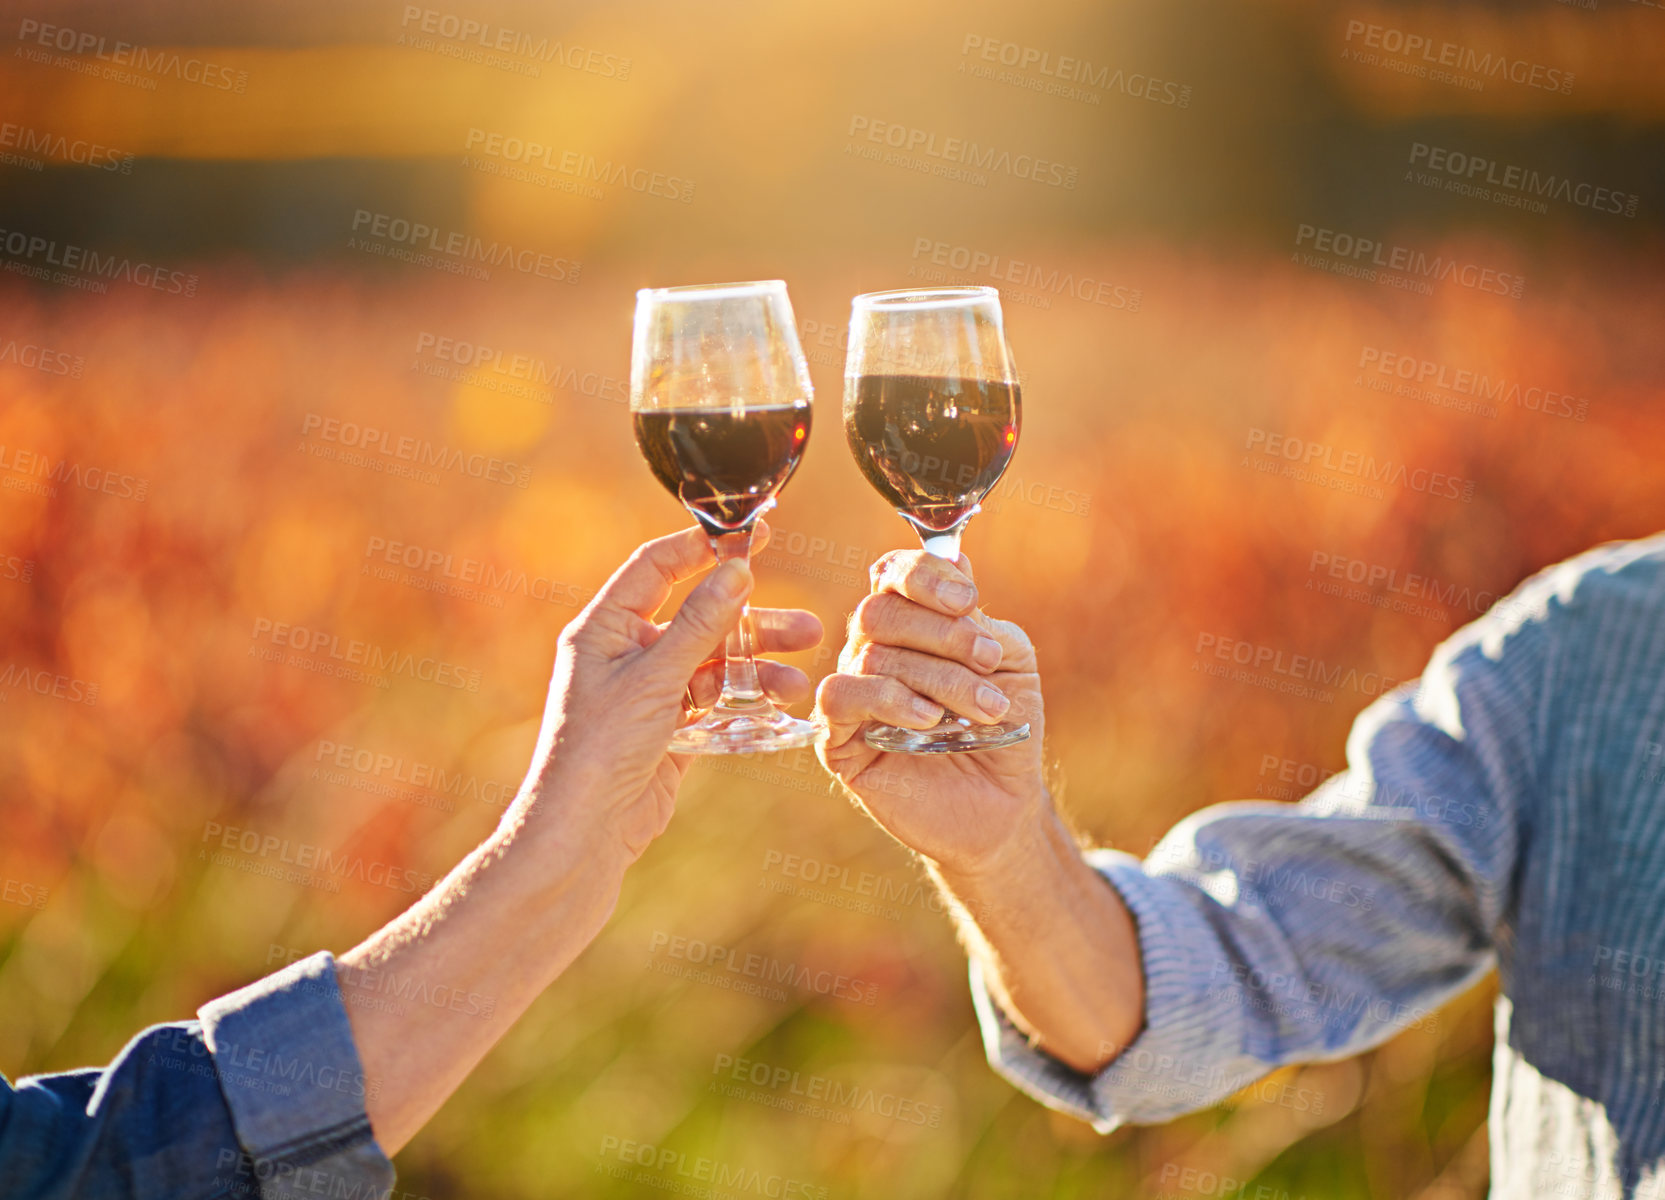 Buy stock photo Cheers, wine glasses and hands in outdoor for love, romance and relax in vineyard or nature. Elderly people, senior couple and alcohol drink on vacation, holiday and calm celebration on anniversary